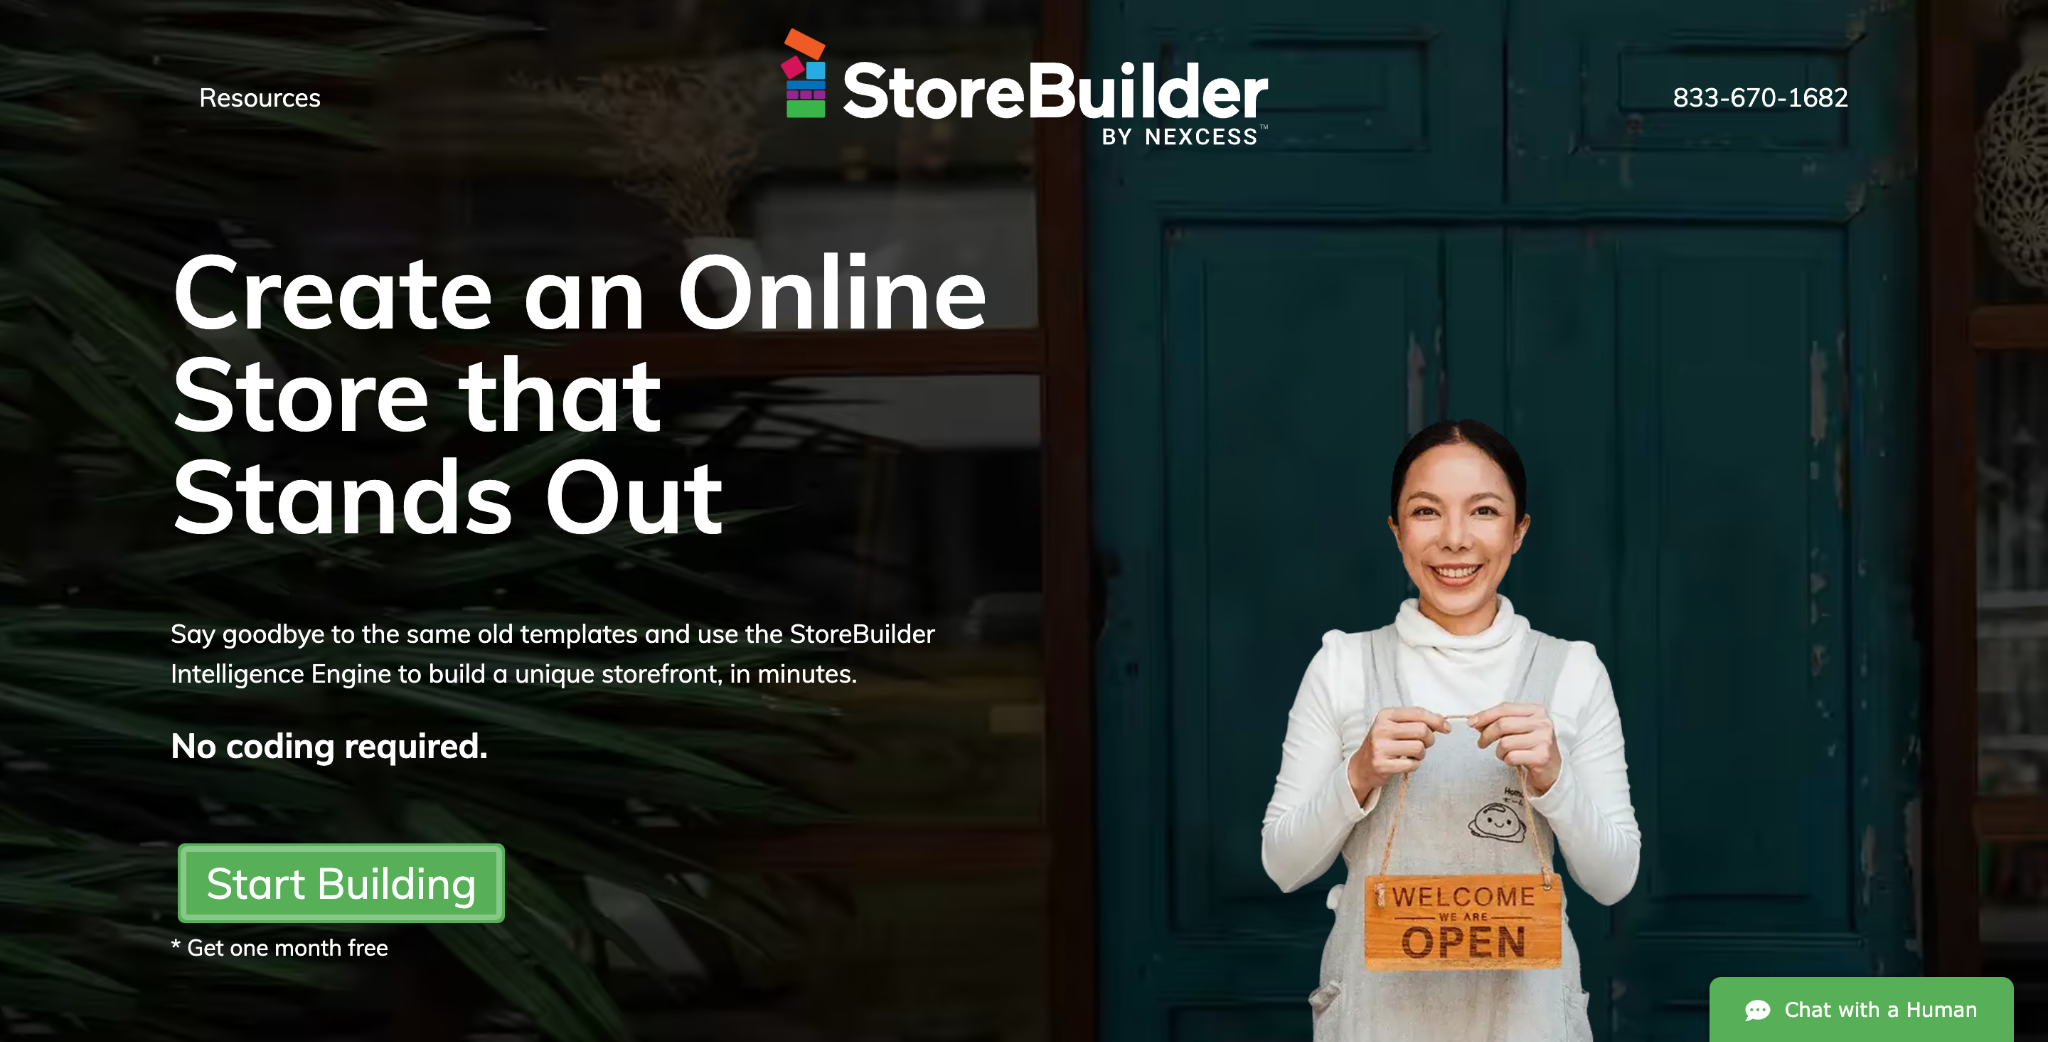 Learn how to build an ecommerce website using Nexcess’ StoreBuilder